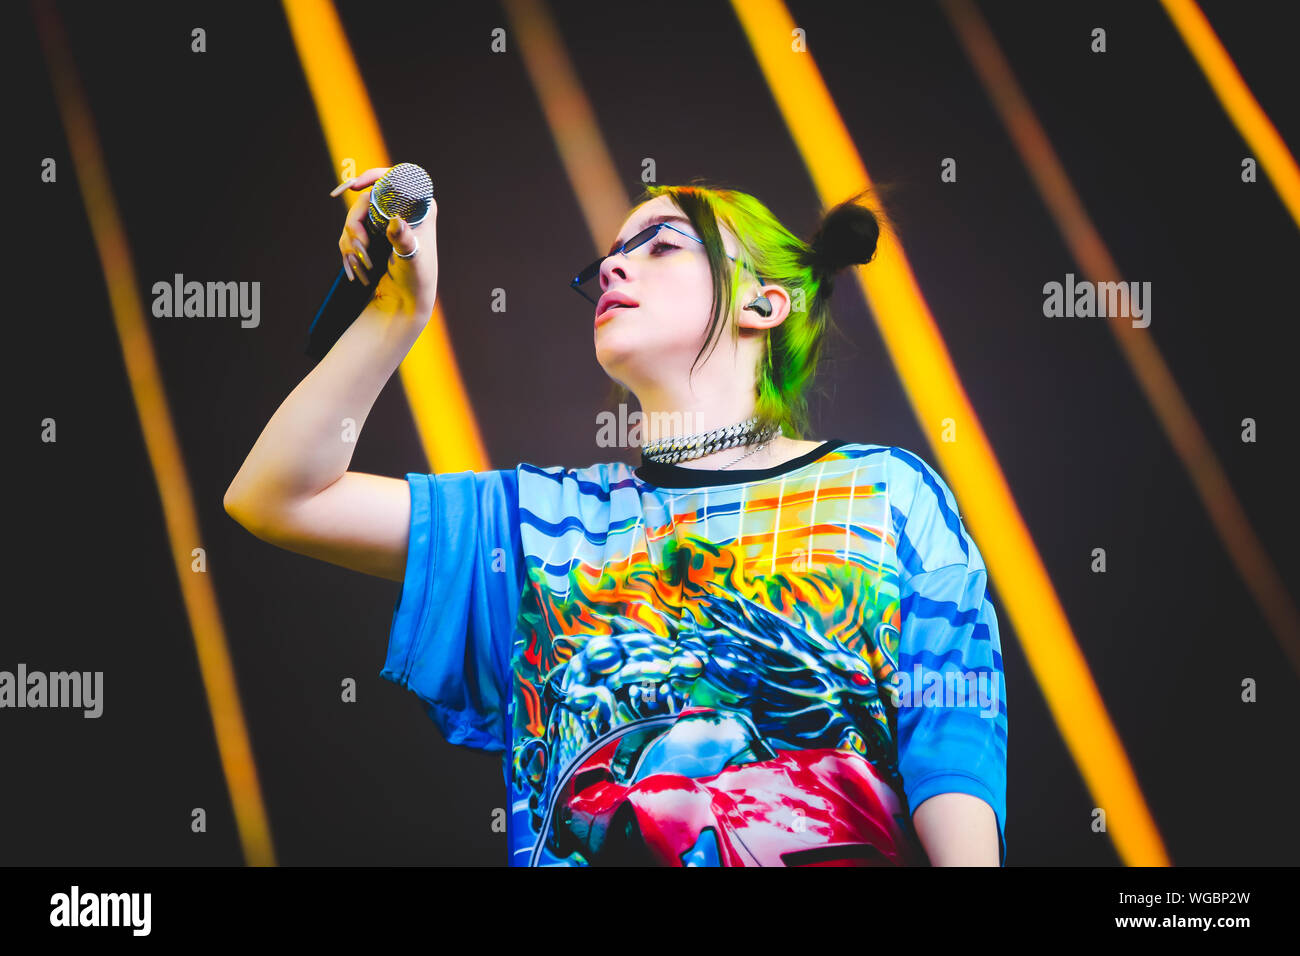 Milan, Italy. 31st Aug, 2019. Billie Eilish Pirate Baird O'Connell is an American singer-songwriter, model and dancer. Born and raised in Highland Park, Los Angeles, she began singing at a young age.In 2019 Billie Eilish has been one of the most hailed artist in the most important festivals all around the world. On the 31st of August Billie Eilish performed before Twenty One Pilots during the second and last day of the second edition of Milano Rocks, the festival organized by Live Nation and Indipendente Concerti in Milan. Credit: Pacific Press Agency/Alamy Live News Stock Photo